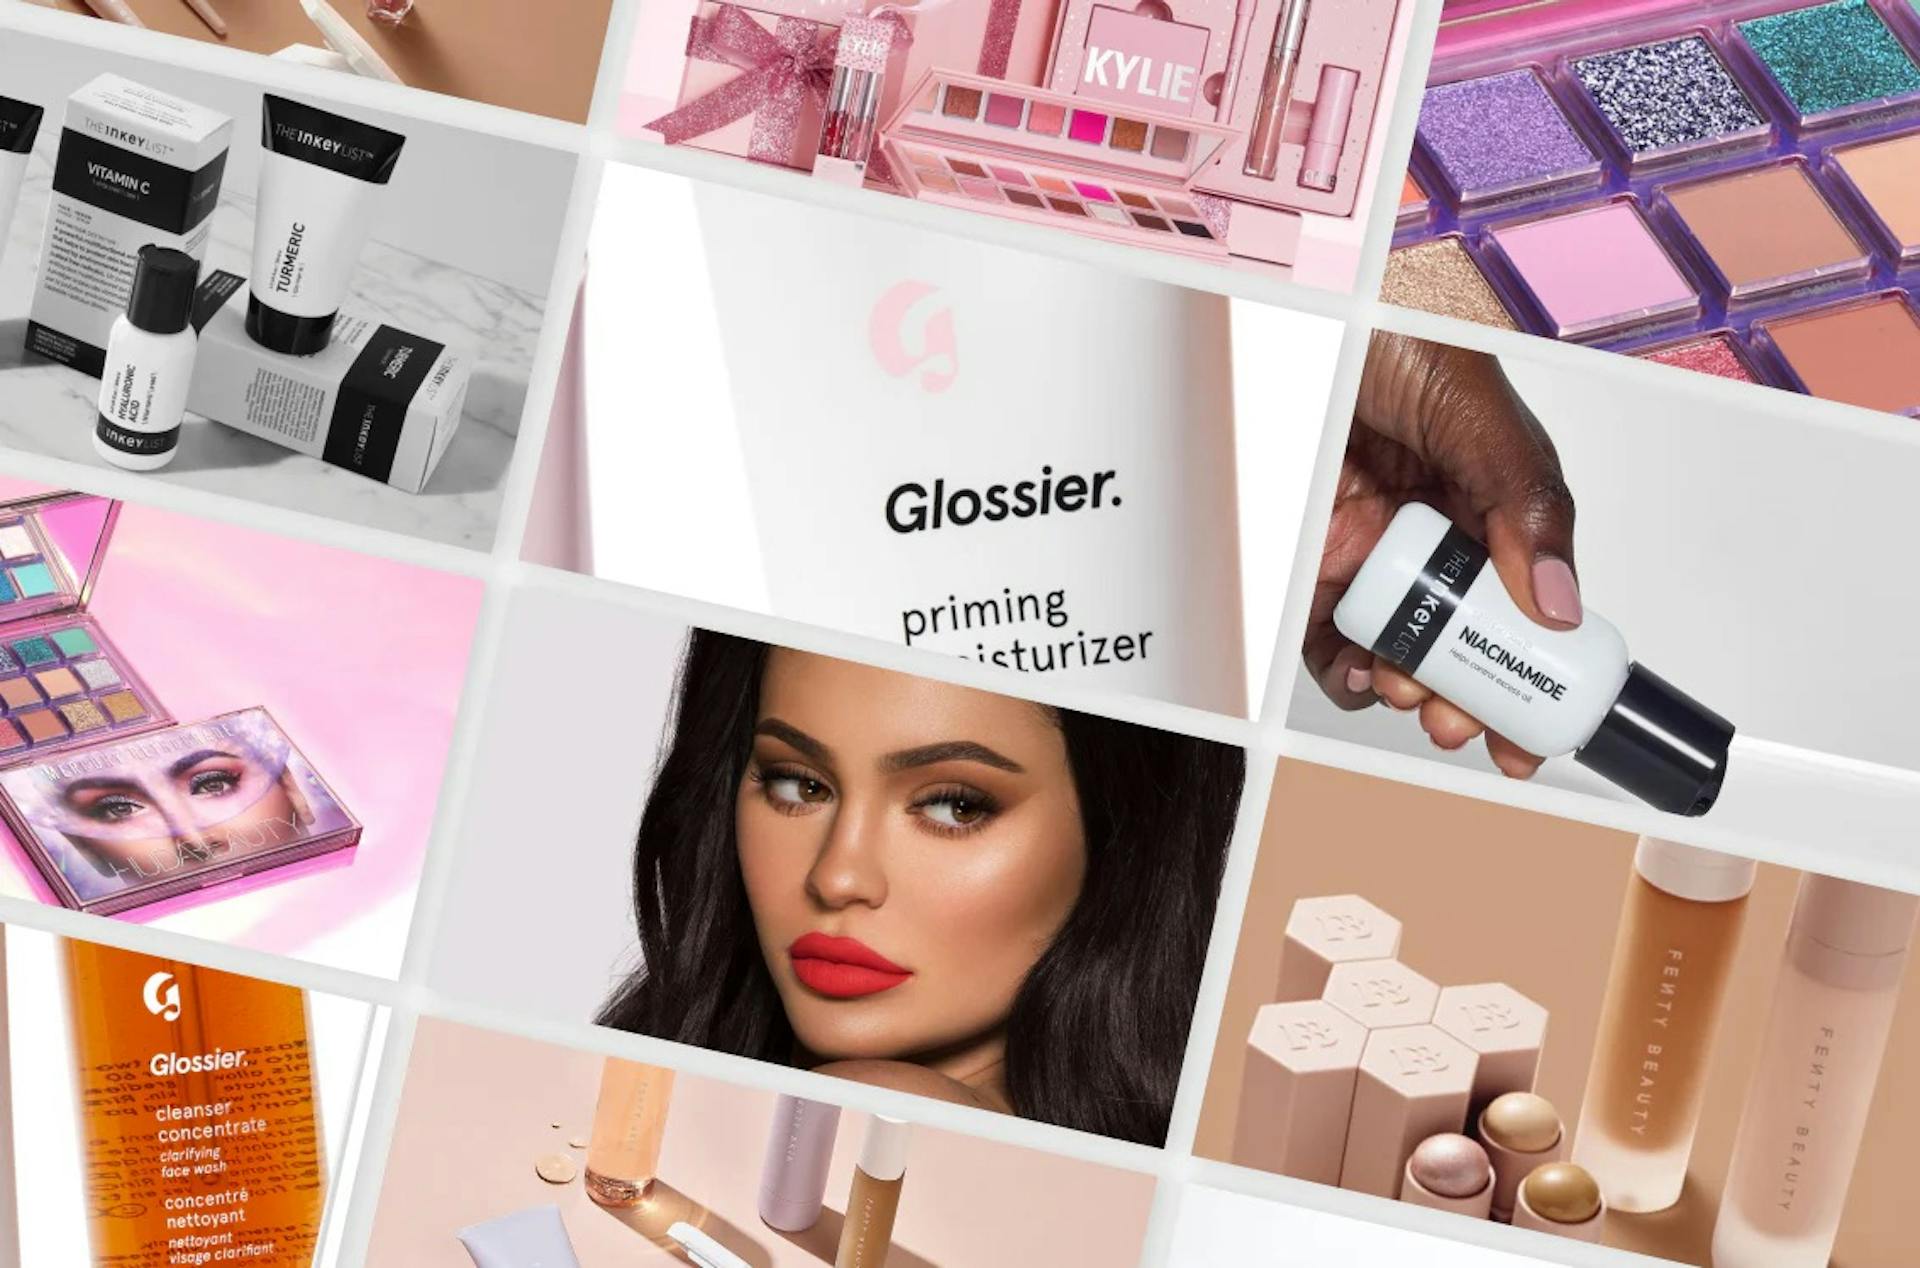 Collage of beauty ecommerce brands.